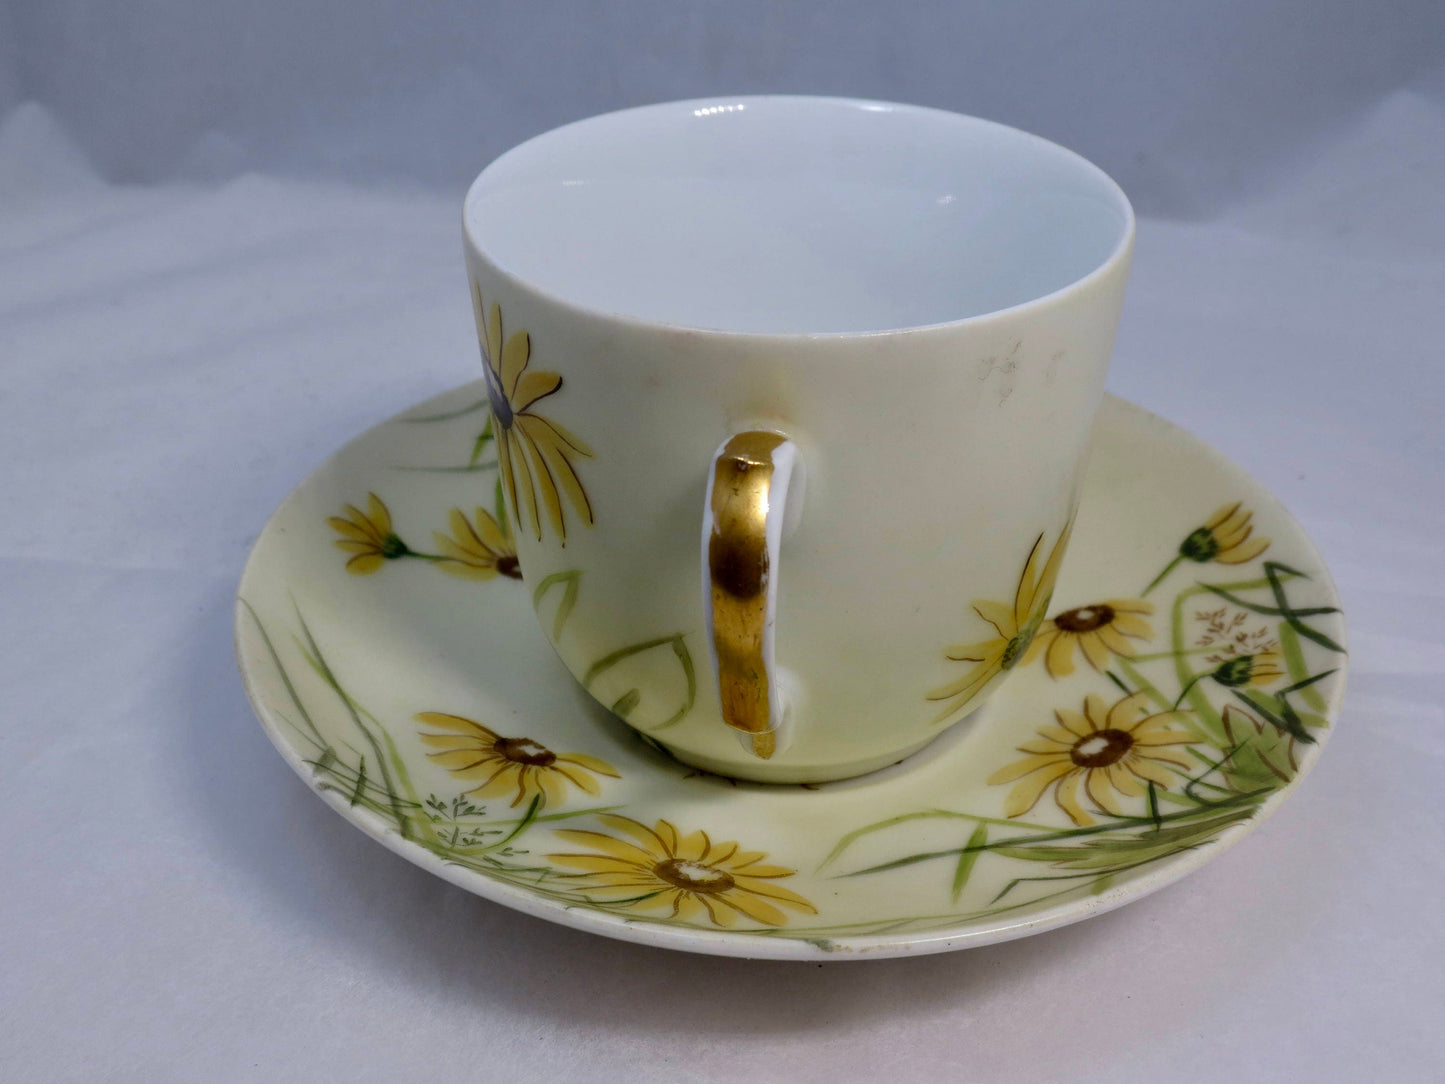 Antique Haviland Limoges Teacup and Saucer, Hand Painted French Porcelain,  1850 Christmas China, Collectible Teacup Set, Early Mark - Duckwells